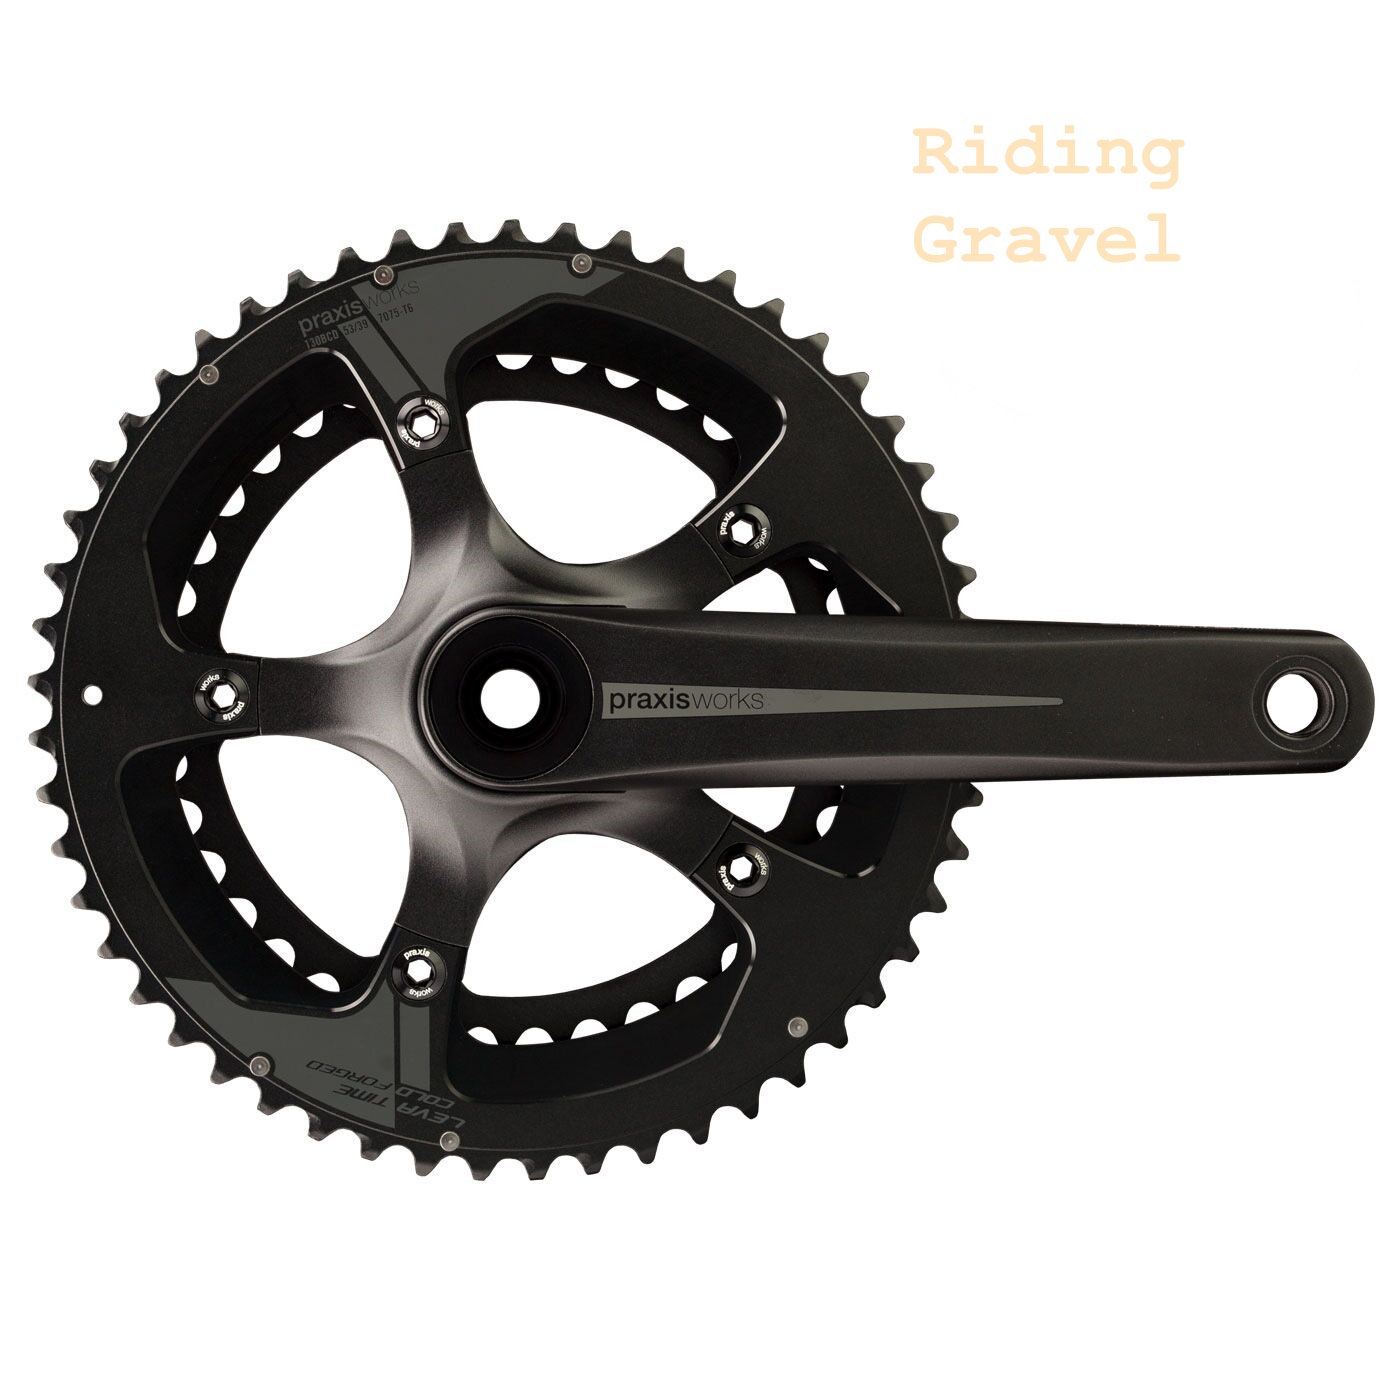 Circle Chainring for Sram AXS 12 speed Gravel Rival 11 22 Force 11 22 Road bike